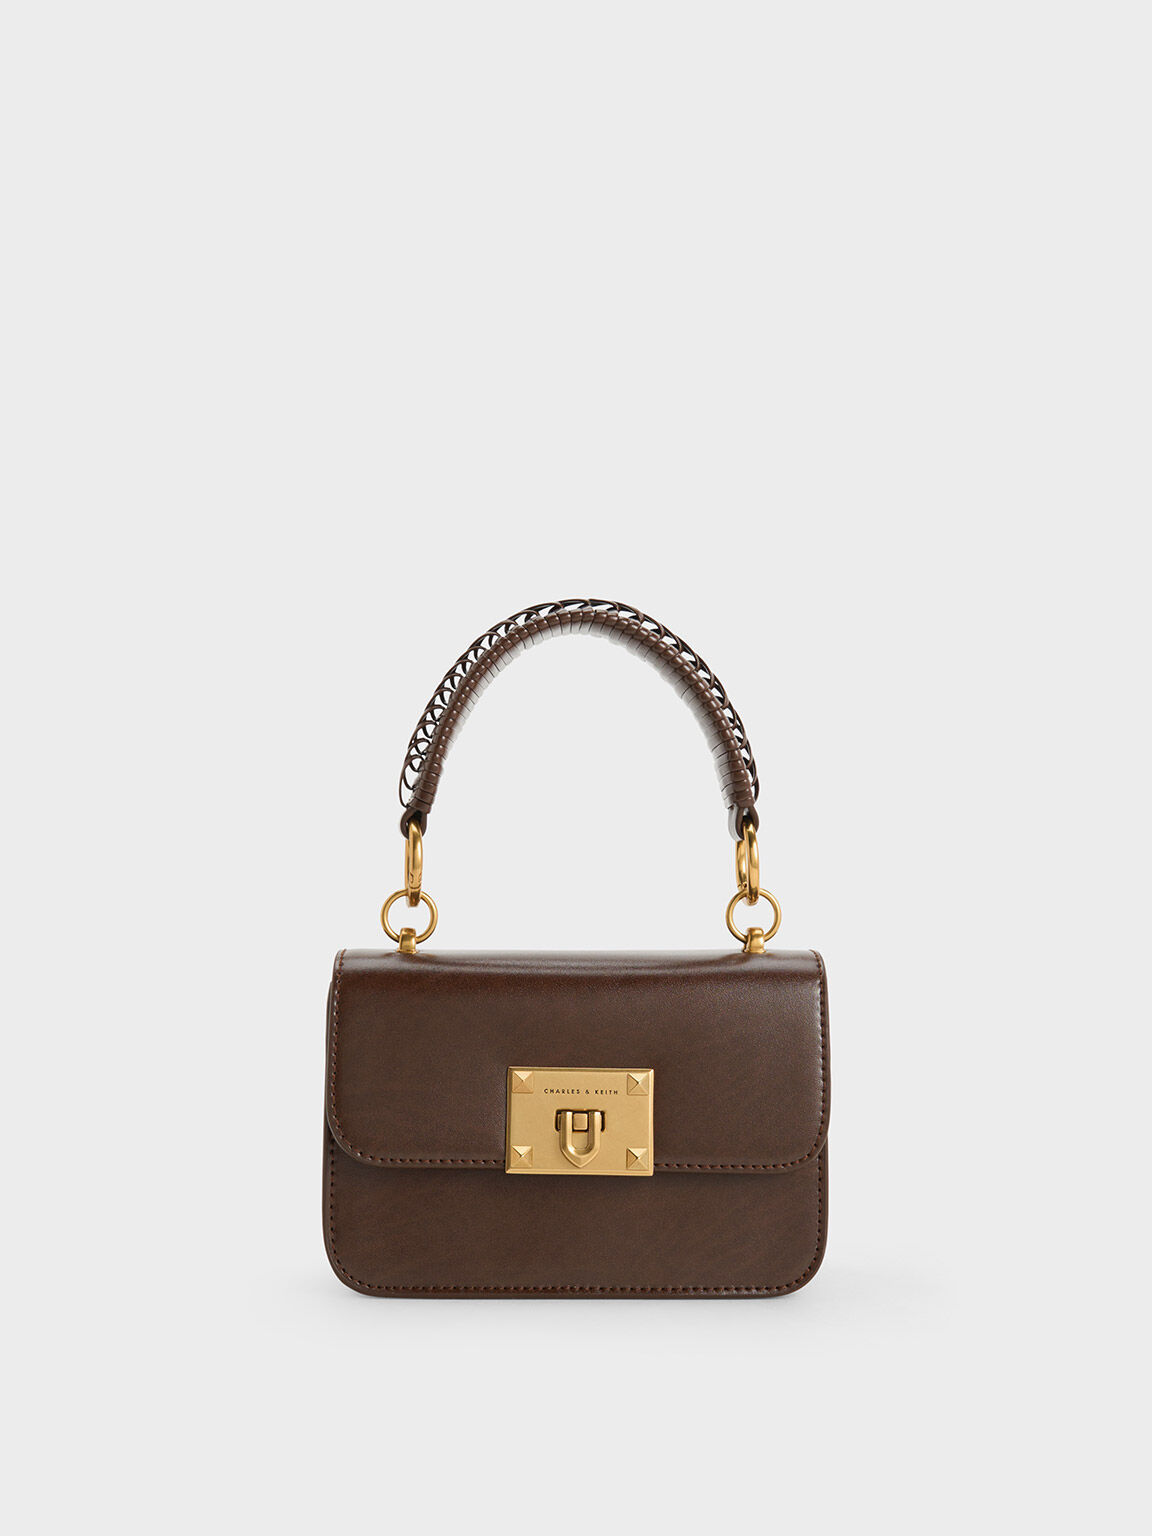 charles and keith most popular bags｜TikTok Search